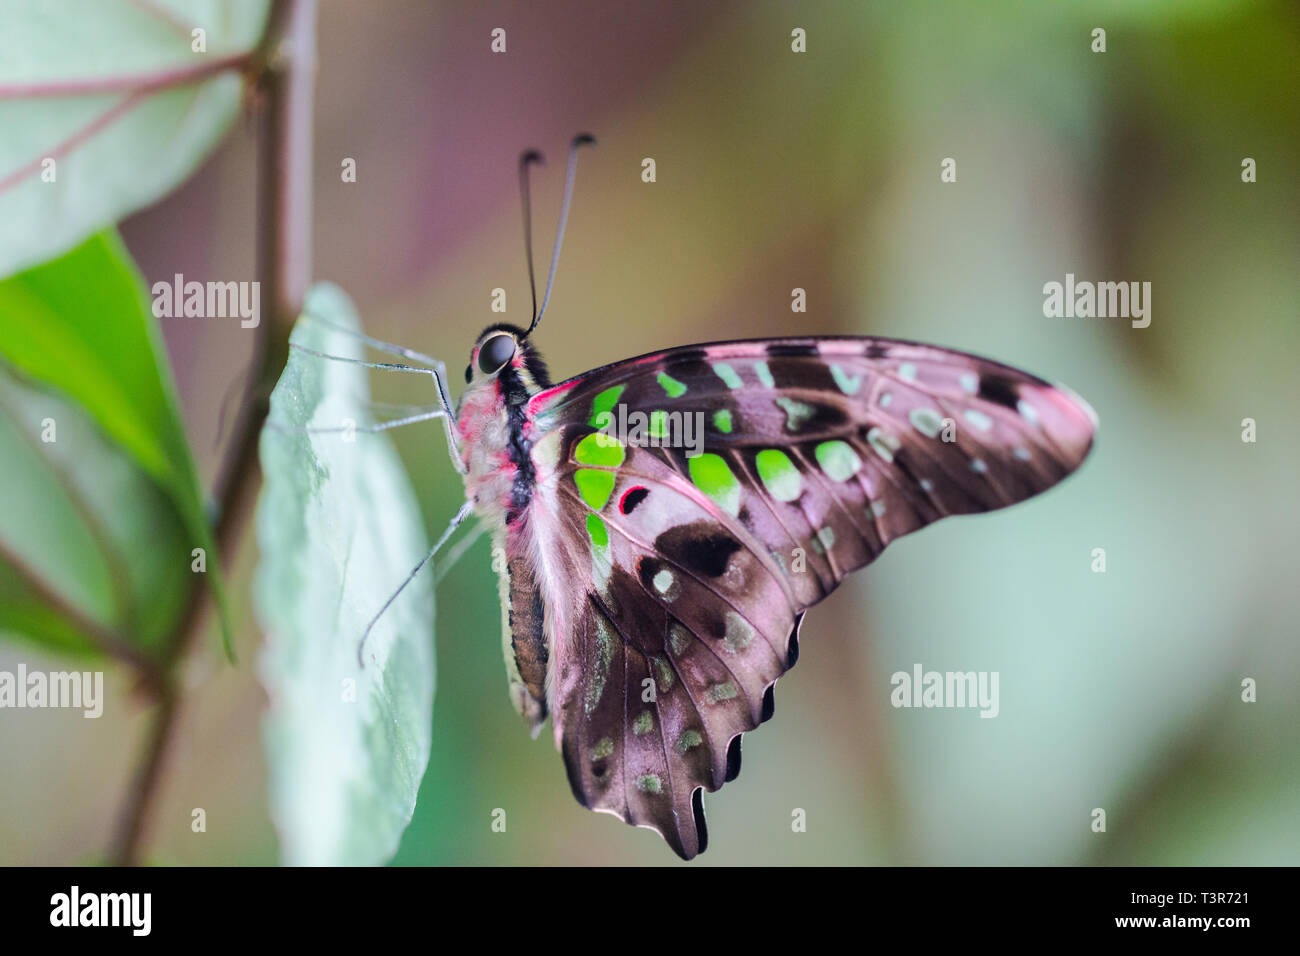 close-up natural tailed jay butterfly (graphium agamemnon), green leaf Stock Photo